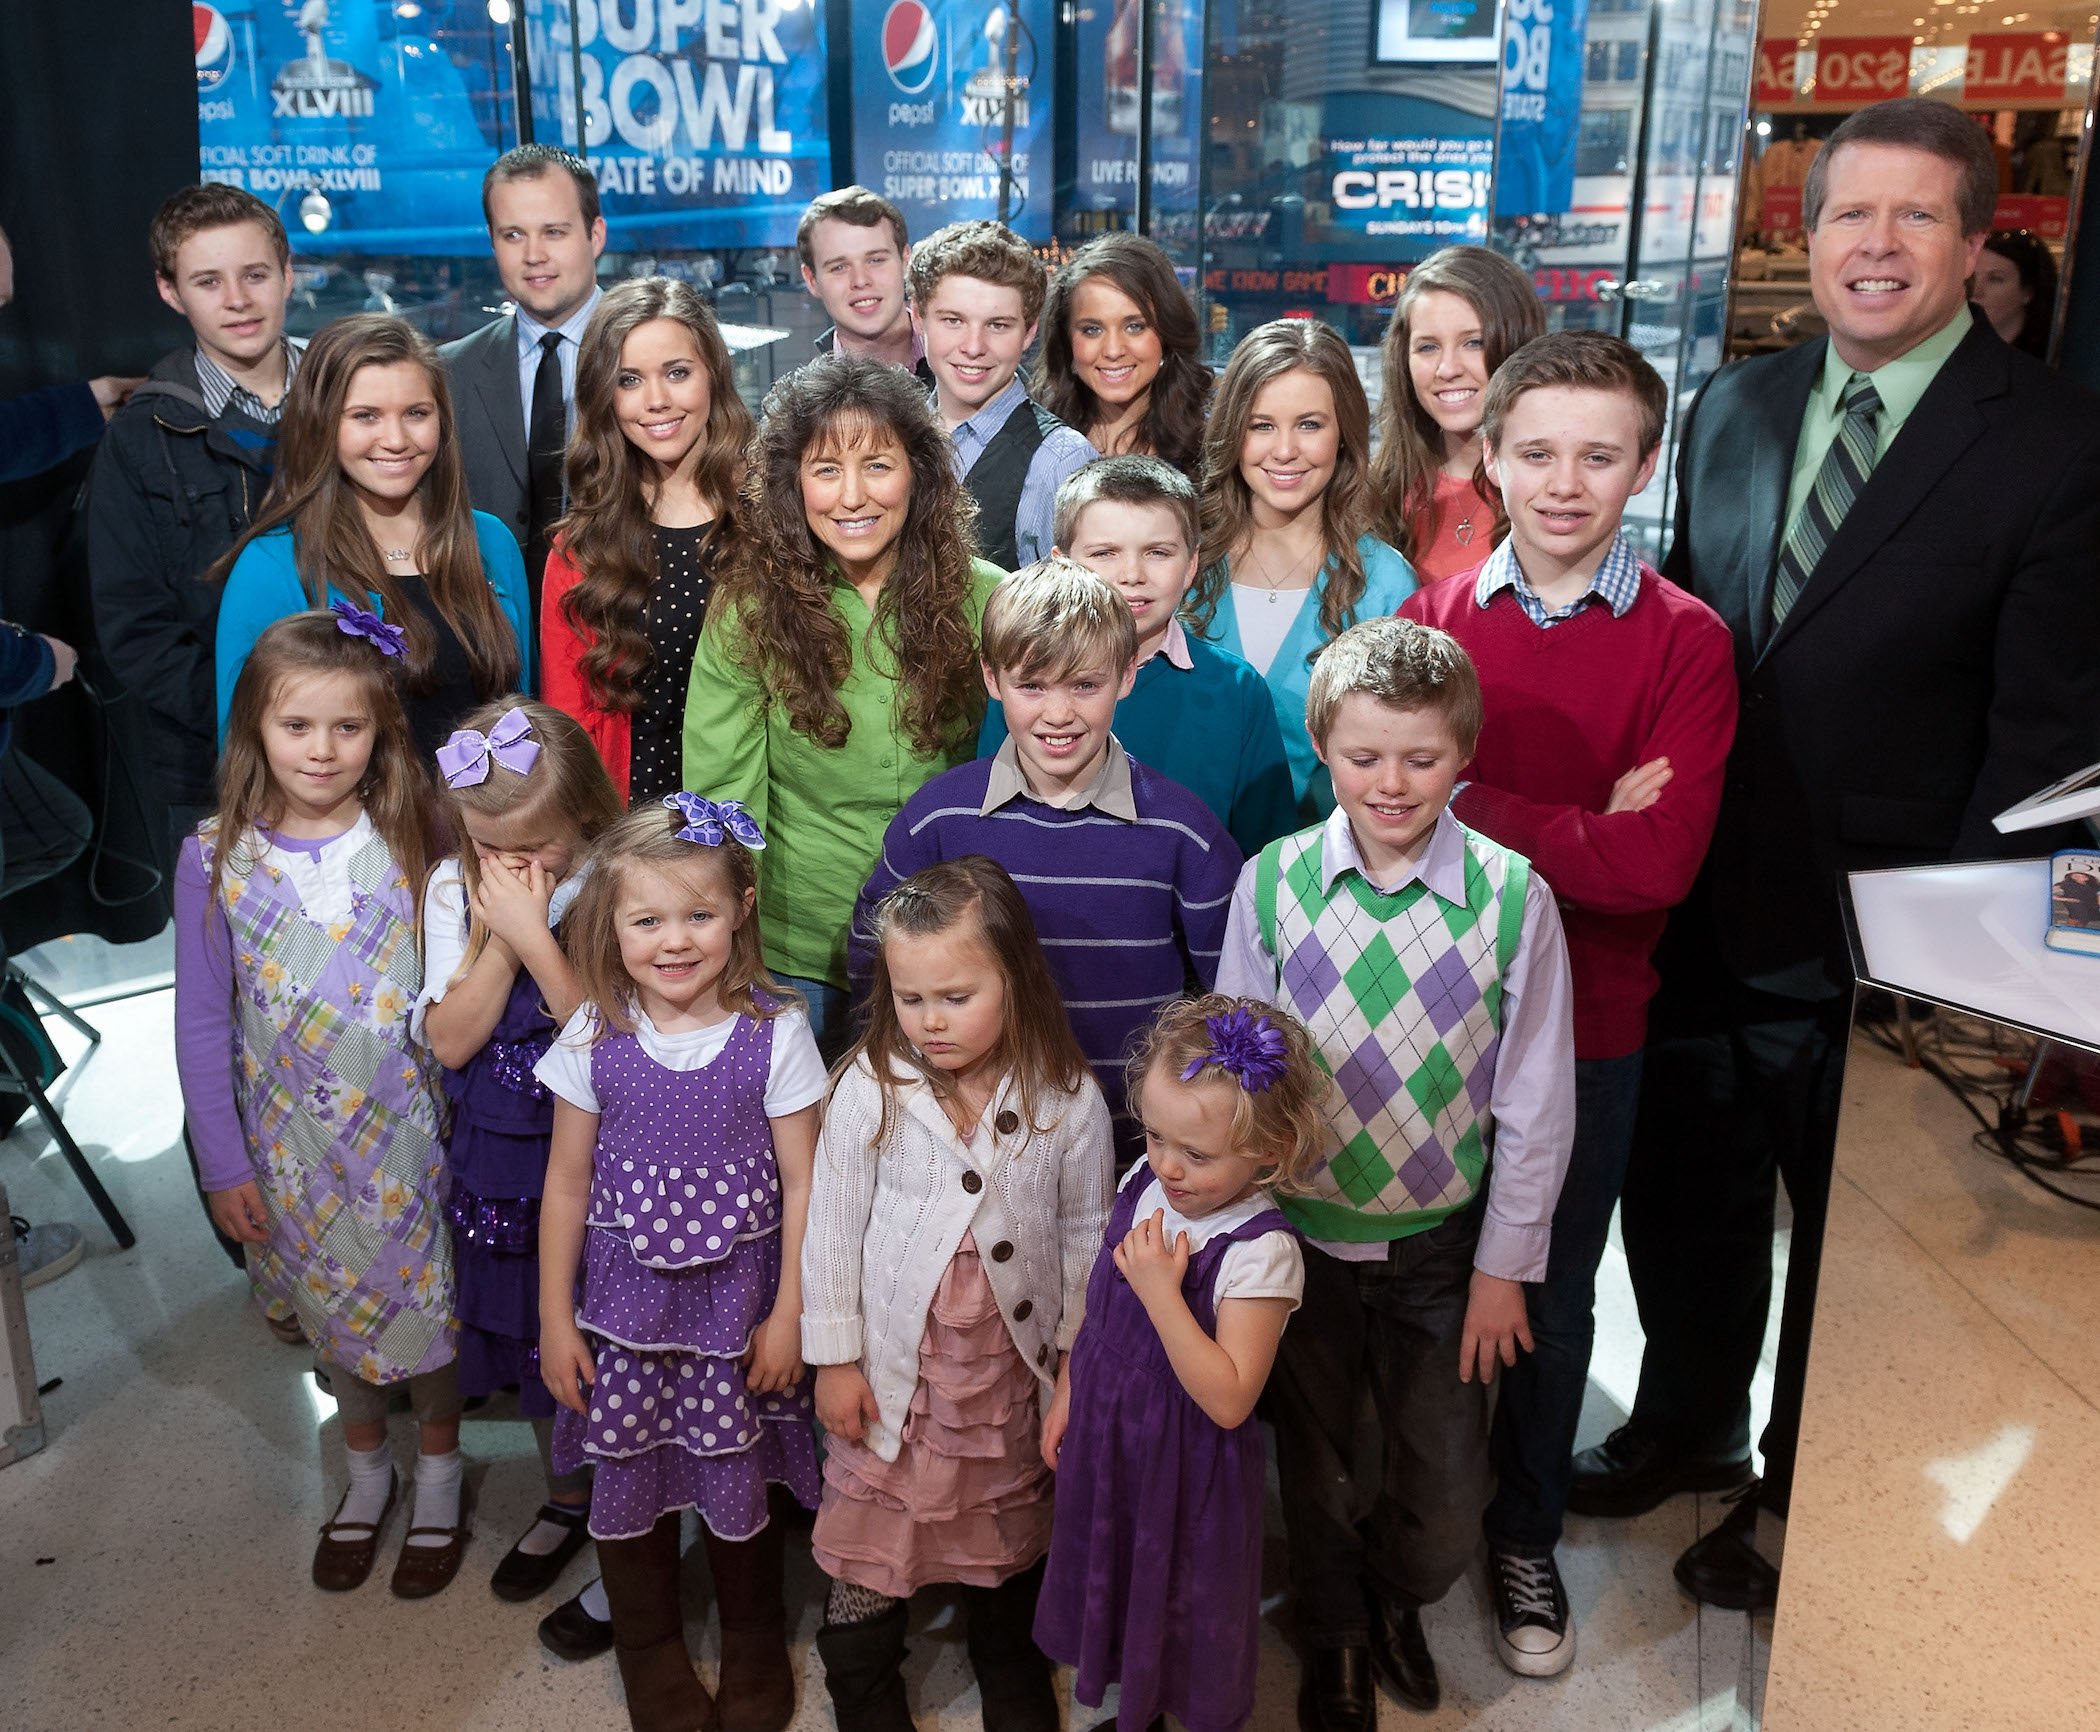 The Duggar family from TLC's 'Counting On' visits 'Extra' at their New York studios